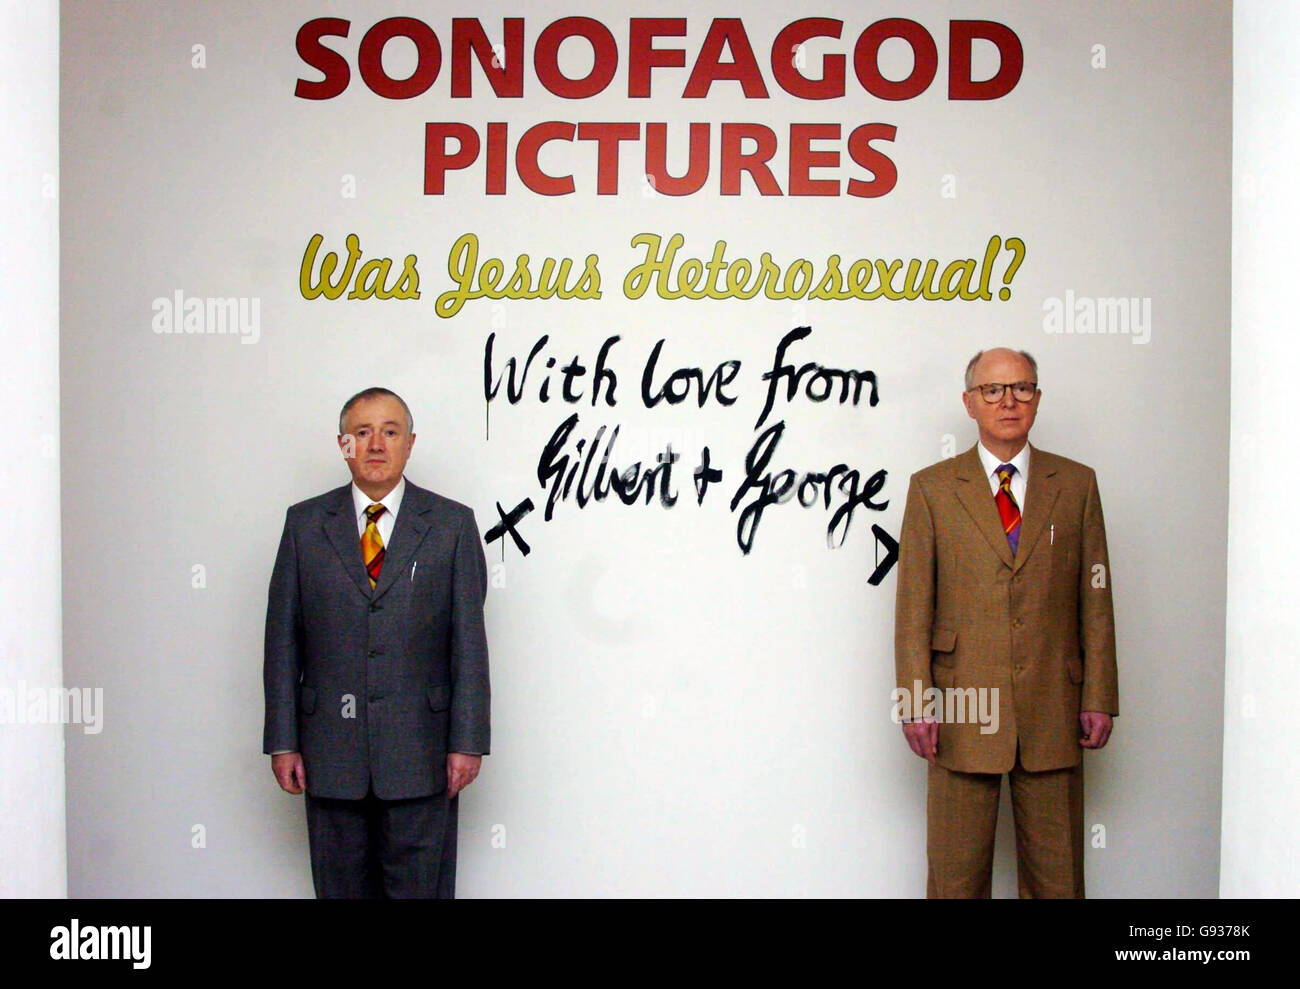 Gilbert (left) & George appear at a press view of their new exhibition 'Sonofagod Pictures Was Jesus Heterosexual?' at White Cube in Hoxton, east London, Thursday January 19, 2006. The exhibition by the infamous duo opens to the public tomorrow and runs until February 25. PRESS ASSOCIATION Photo. Photo credit should read: Johnny Green/PA Stock Photo